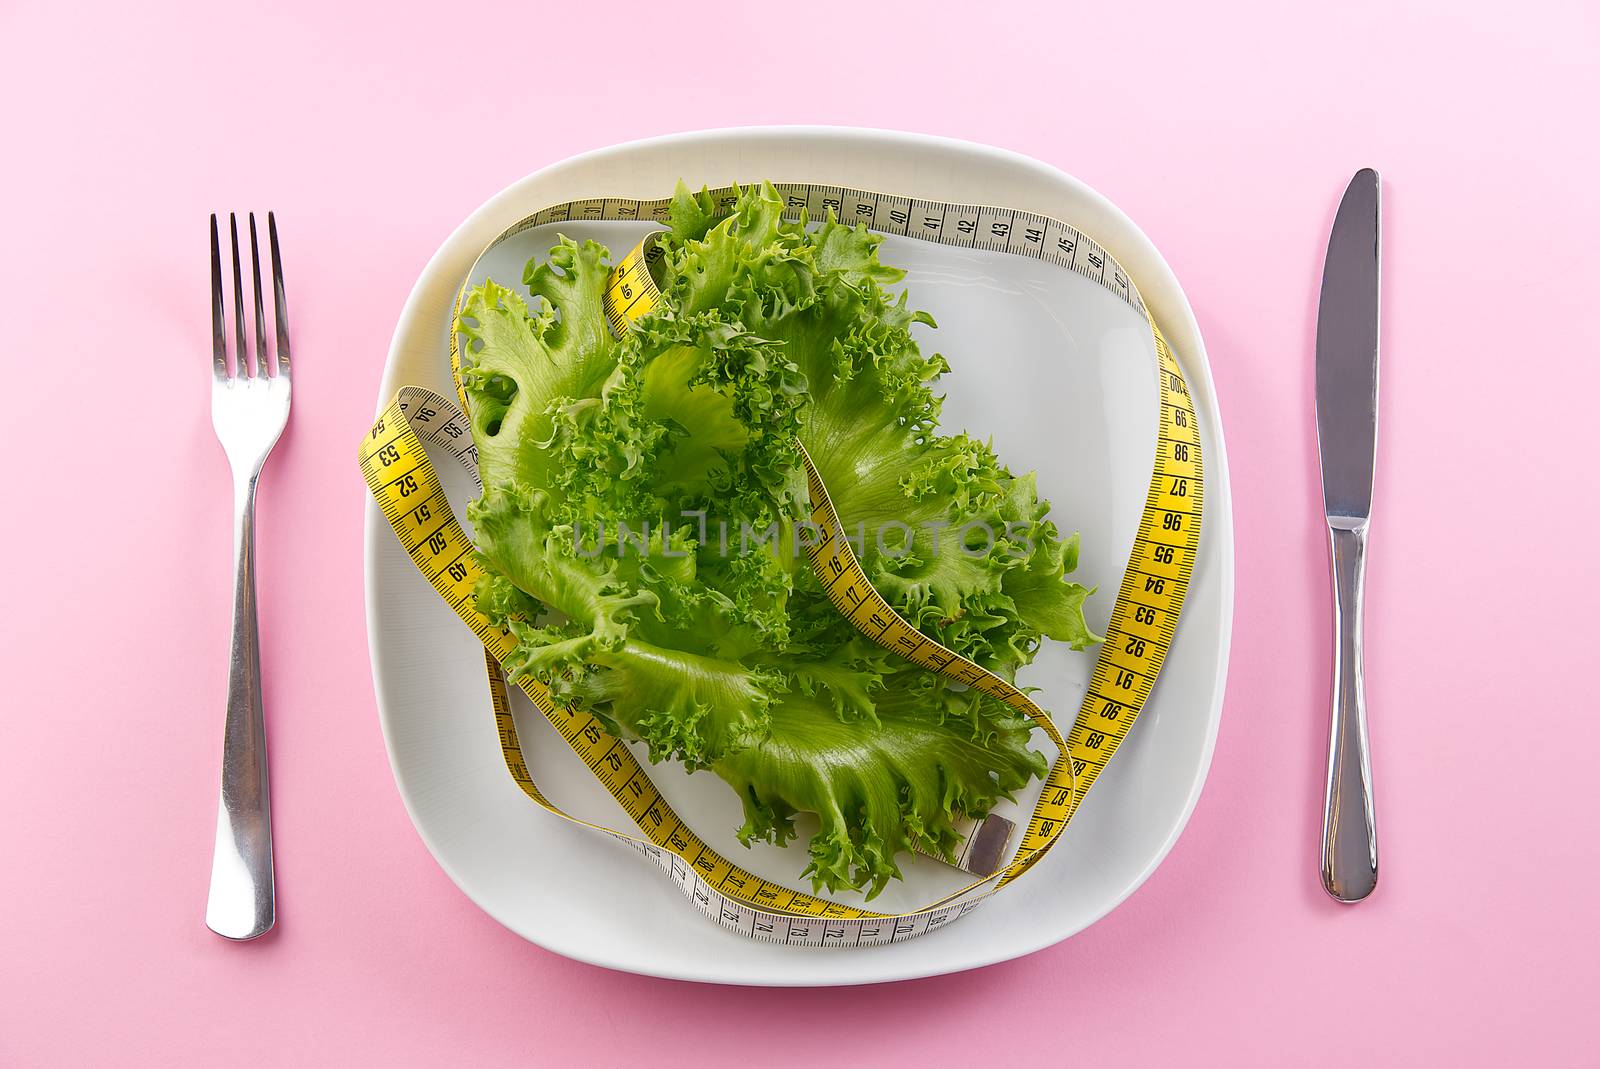 Bunch of vegetables isolated on pink background. salad tape weight. Pile of fresh vegetables salad leafe with measuring tape